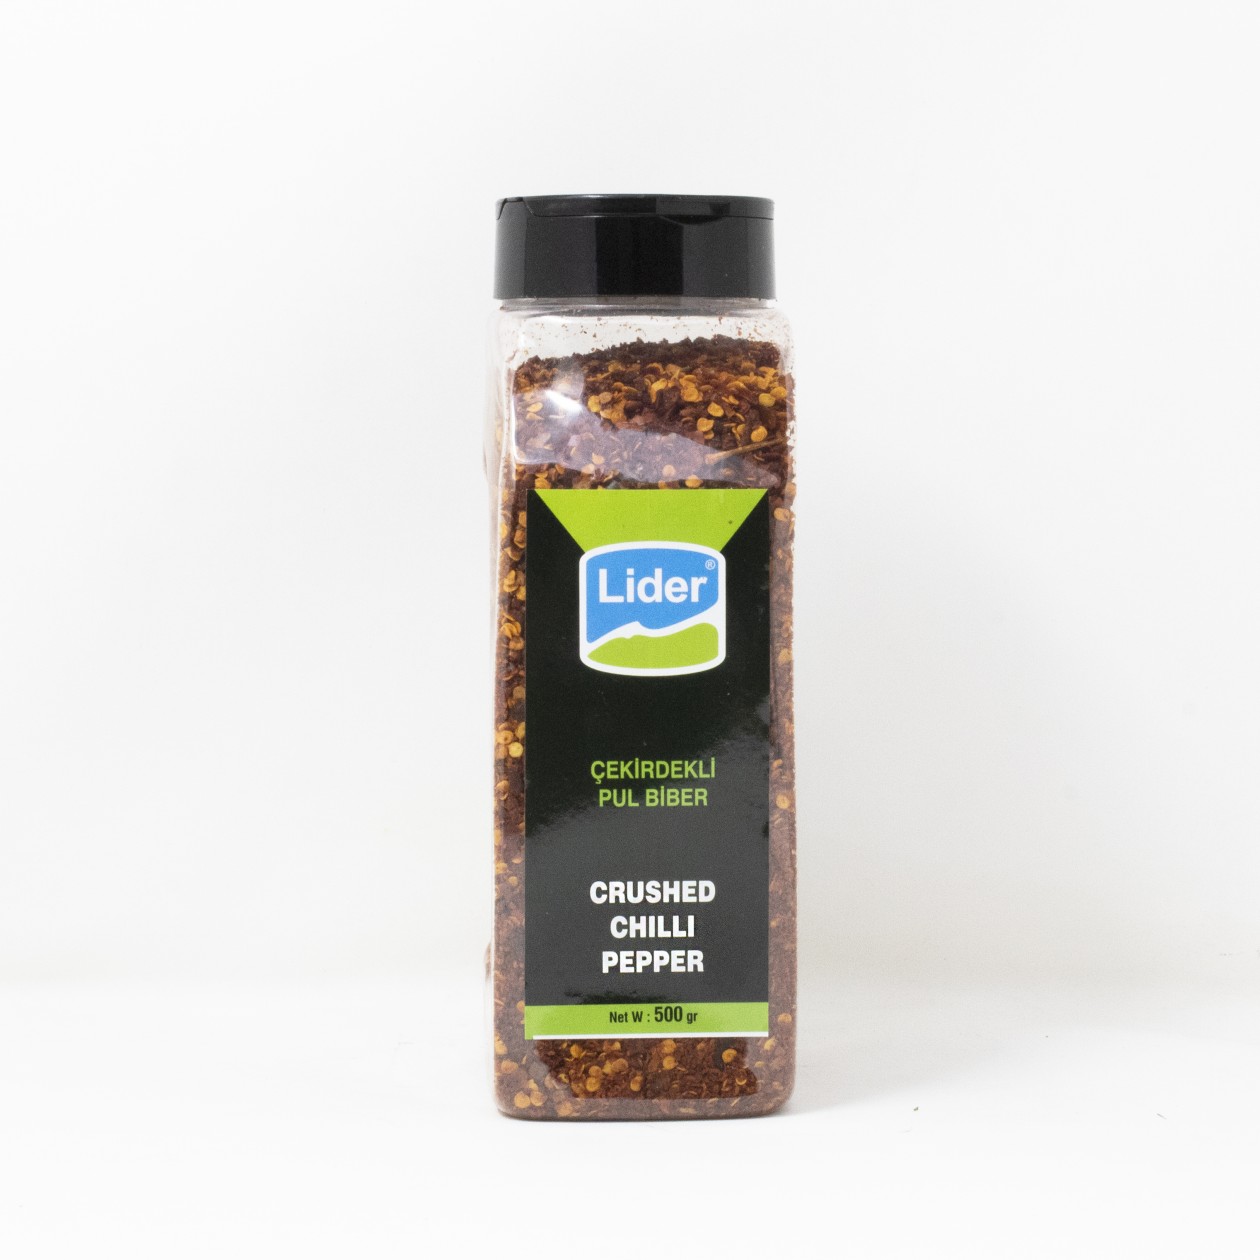 Lider Crushed Chili Peppers 500g